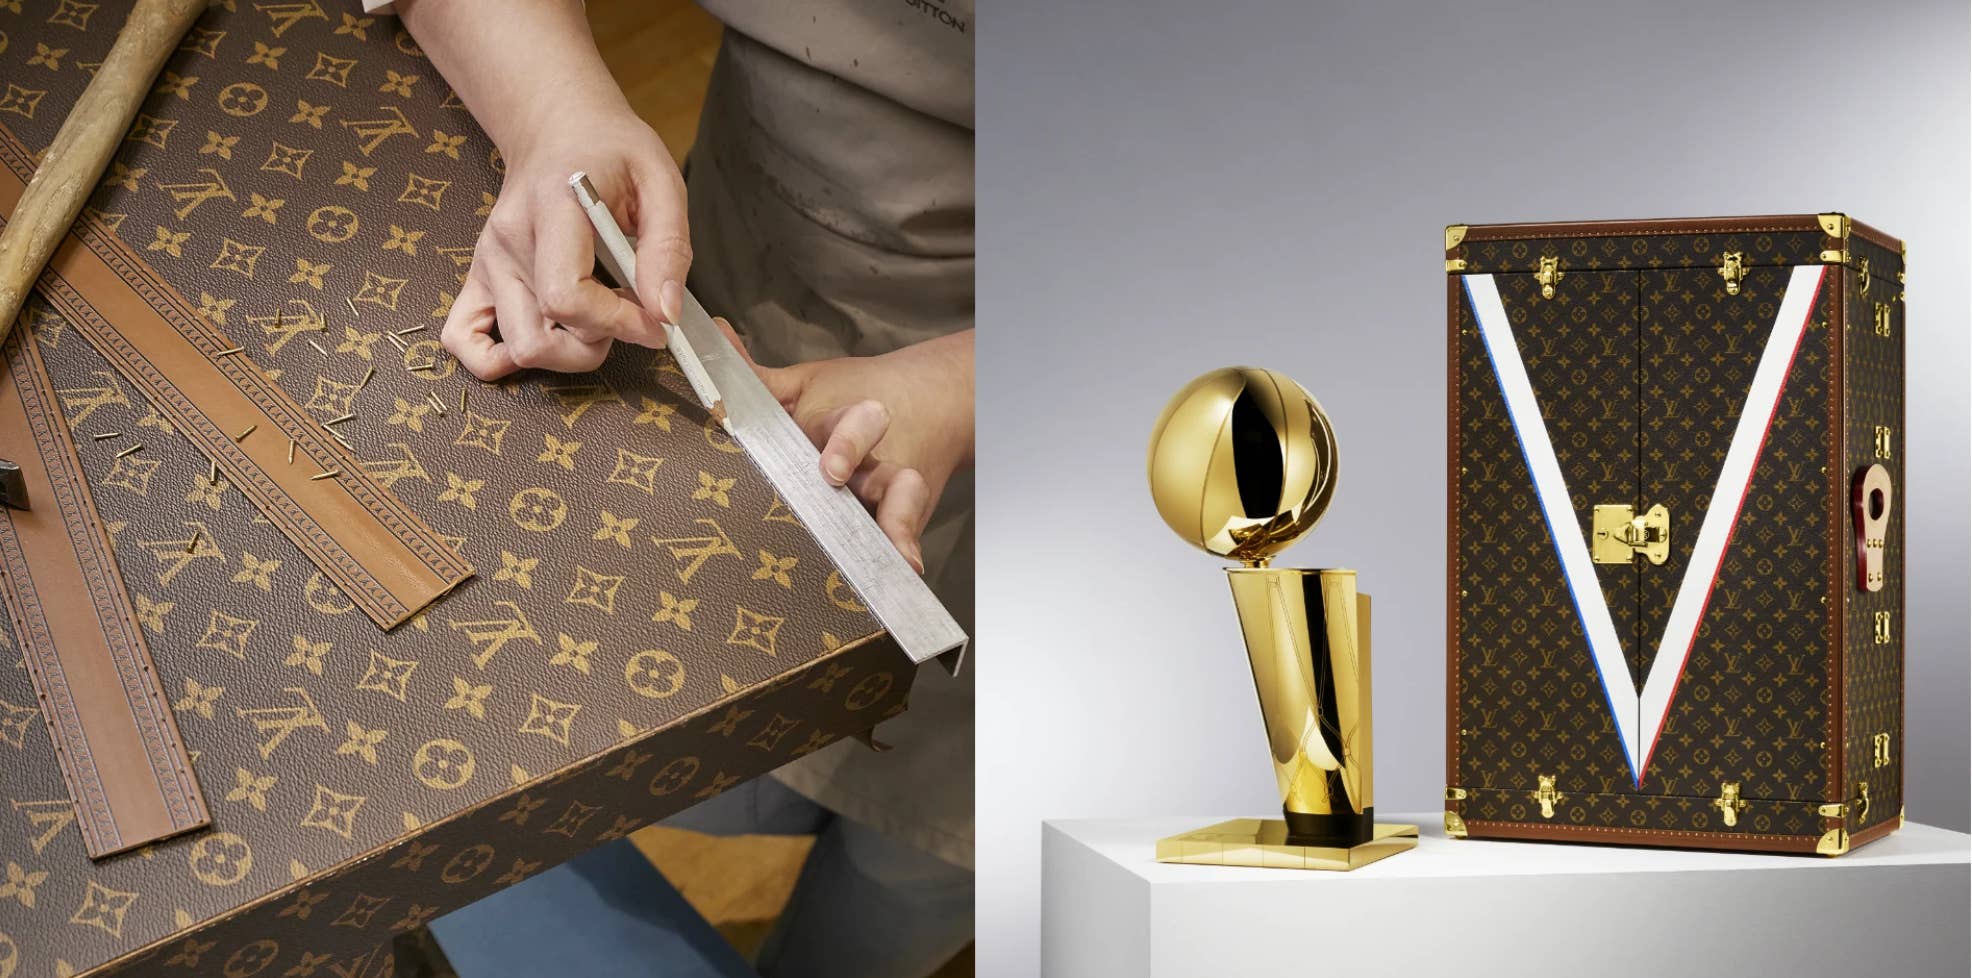 Louis Vuitton and the NBA team up for a multiyear partnership